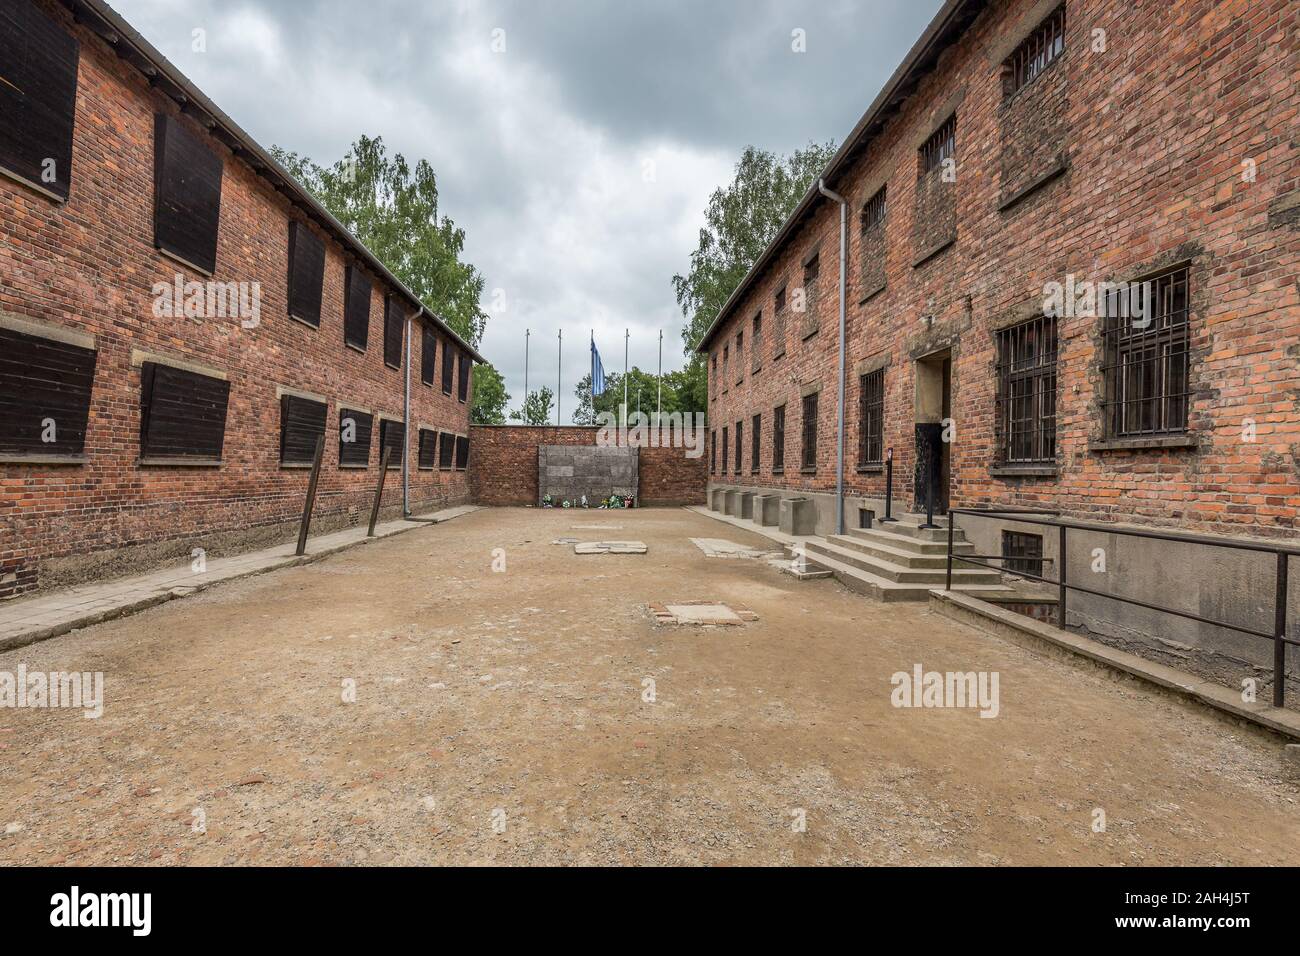 Auschwitz Birkenau, Poland - June 27, 2018: Execution wall at Nazi concentration camp of Auschwitz in Poland. UNESCO World Heritage.Holocaust Remembra Stock Photo